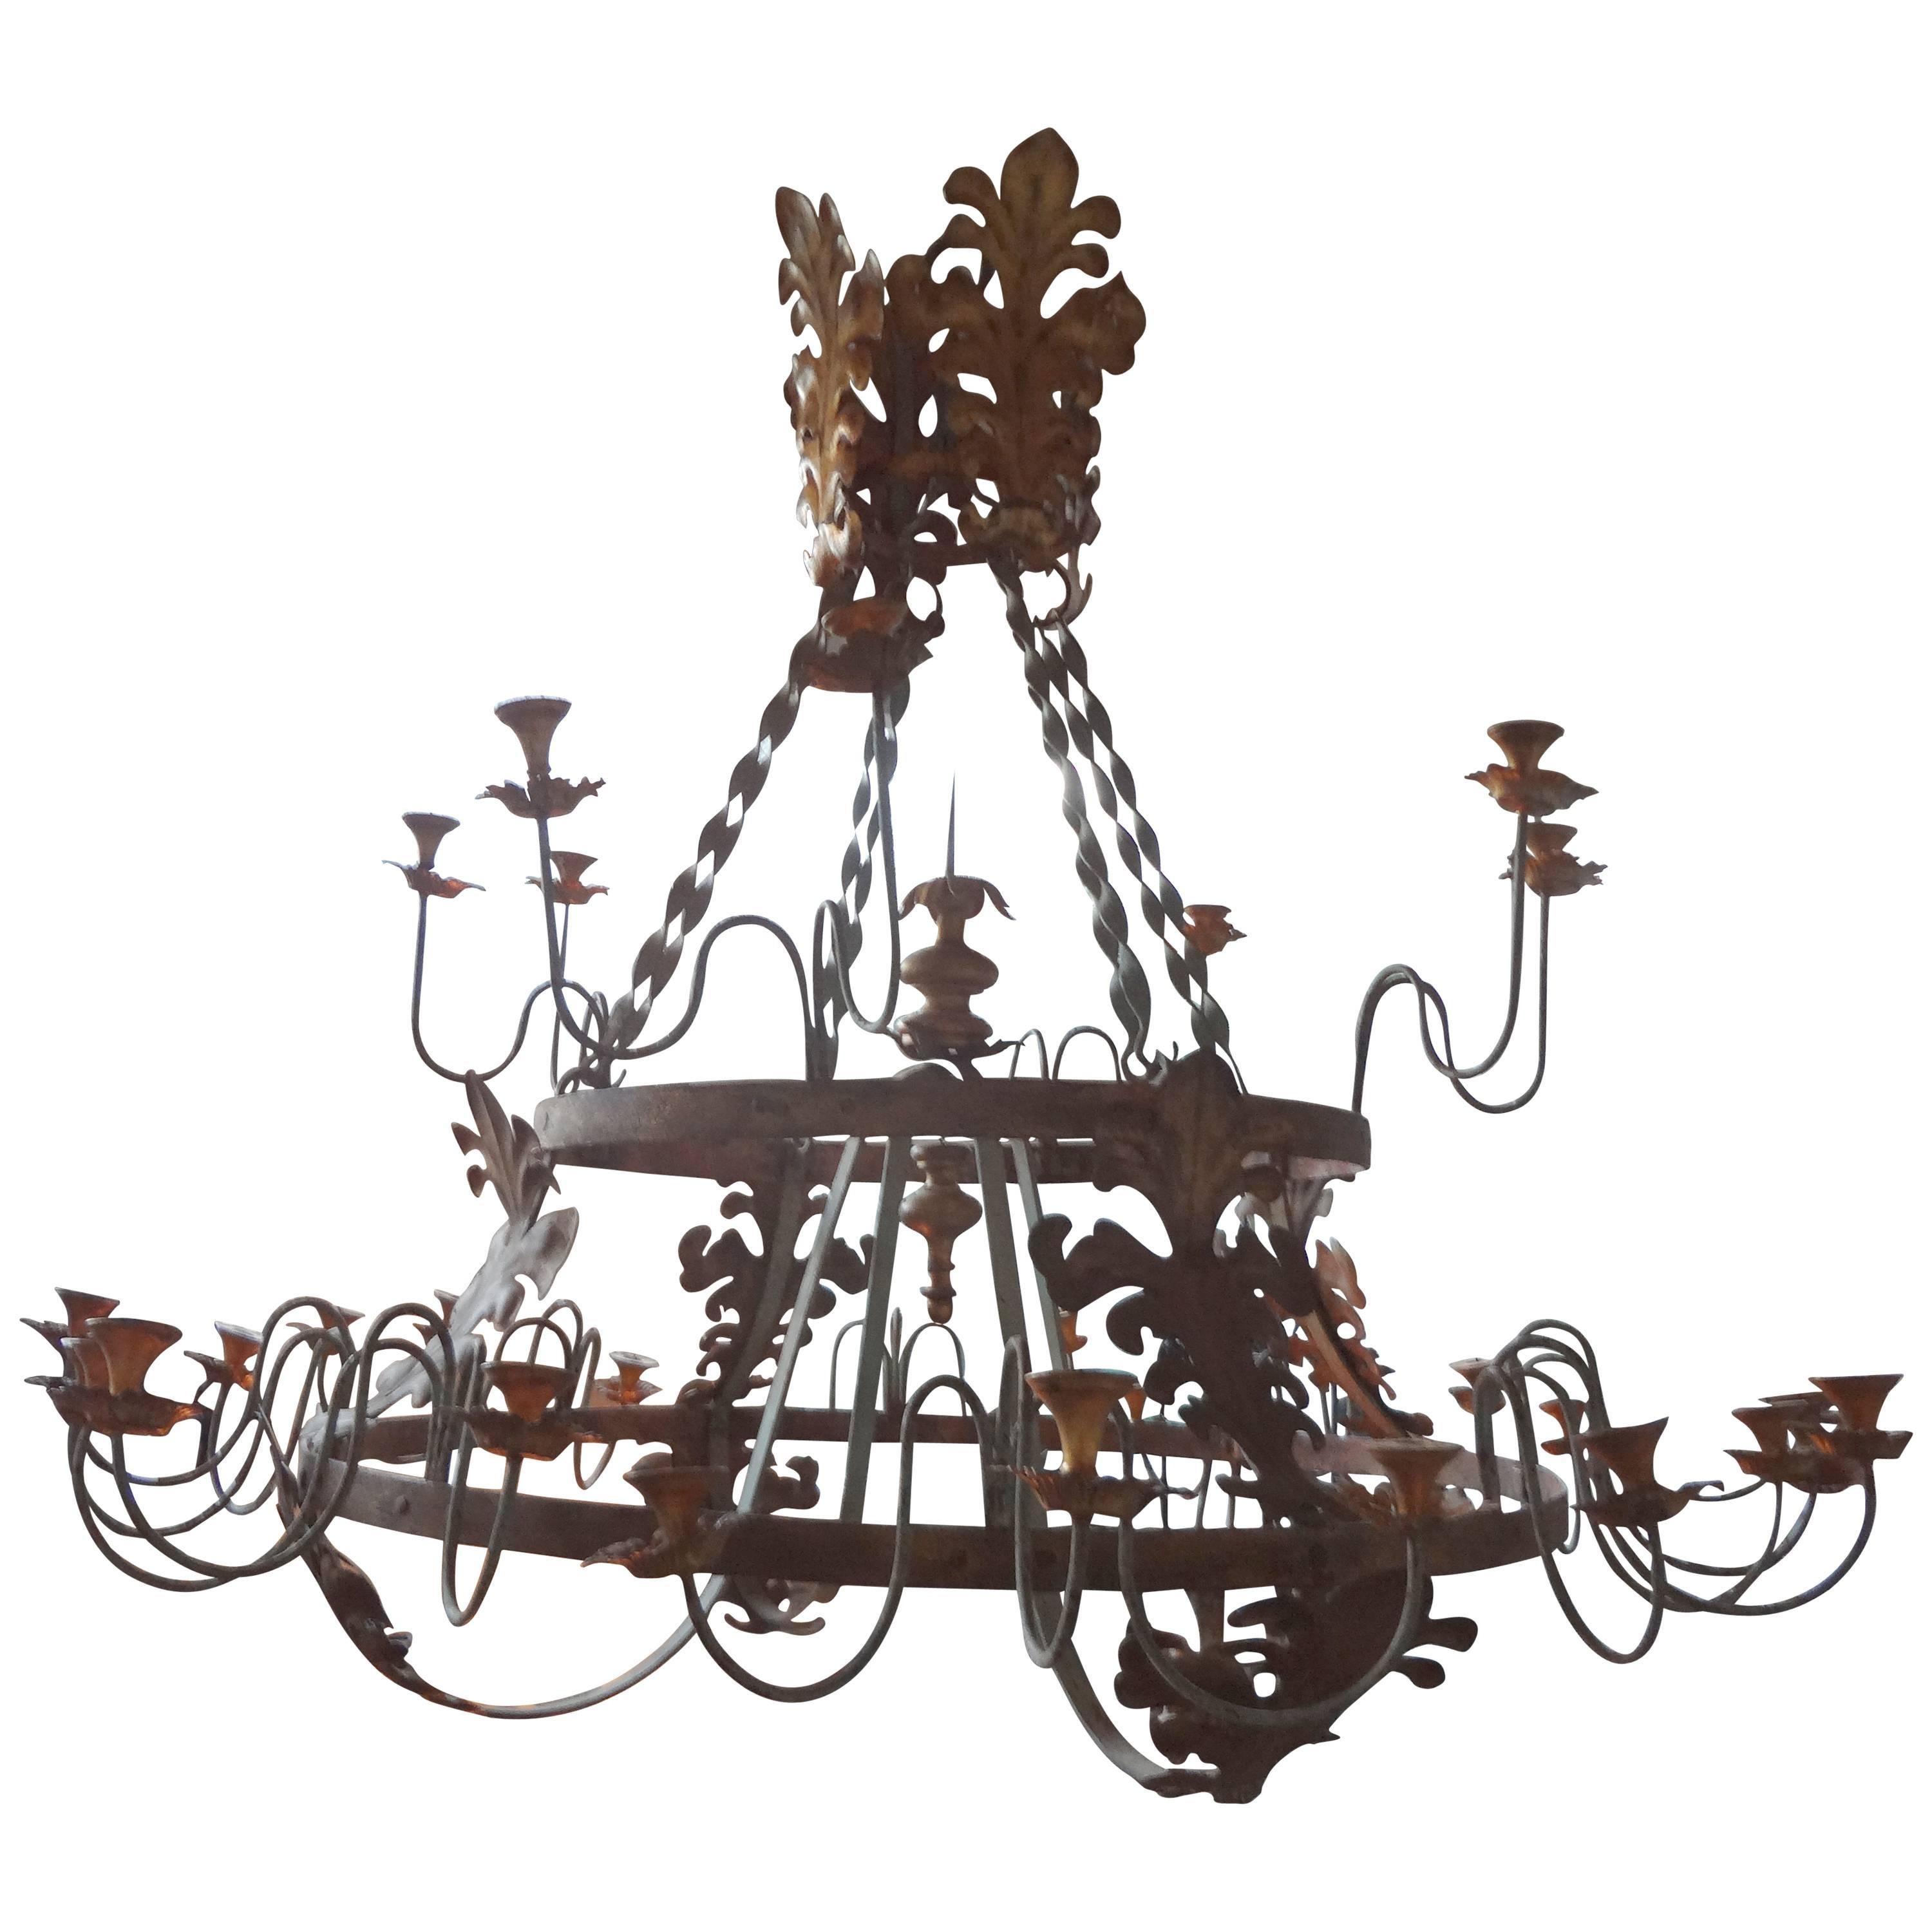 Monumental Italian Wrought Iron, Thirty-Two-Light Chandelier 72" D